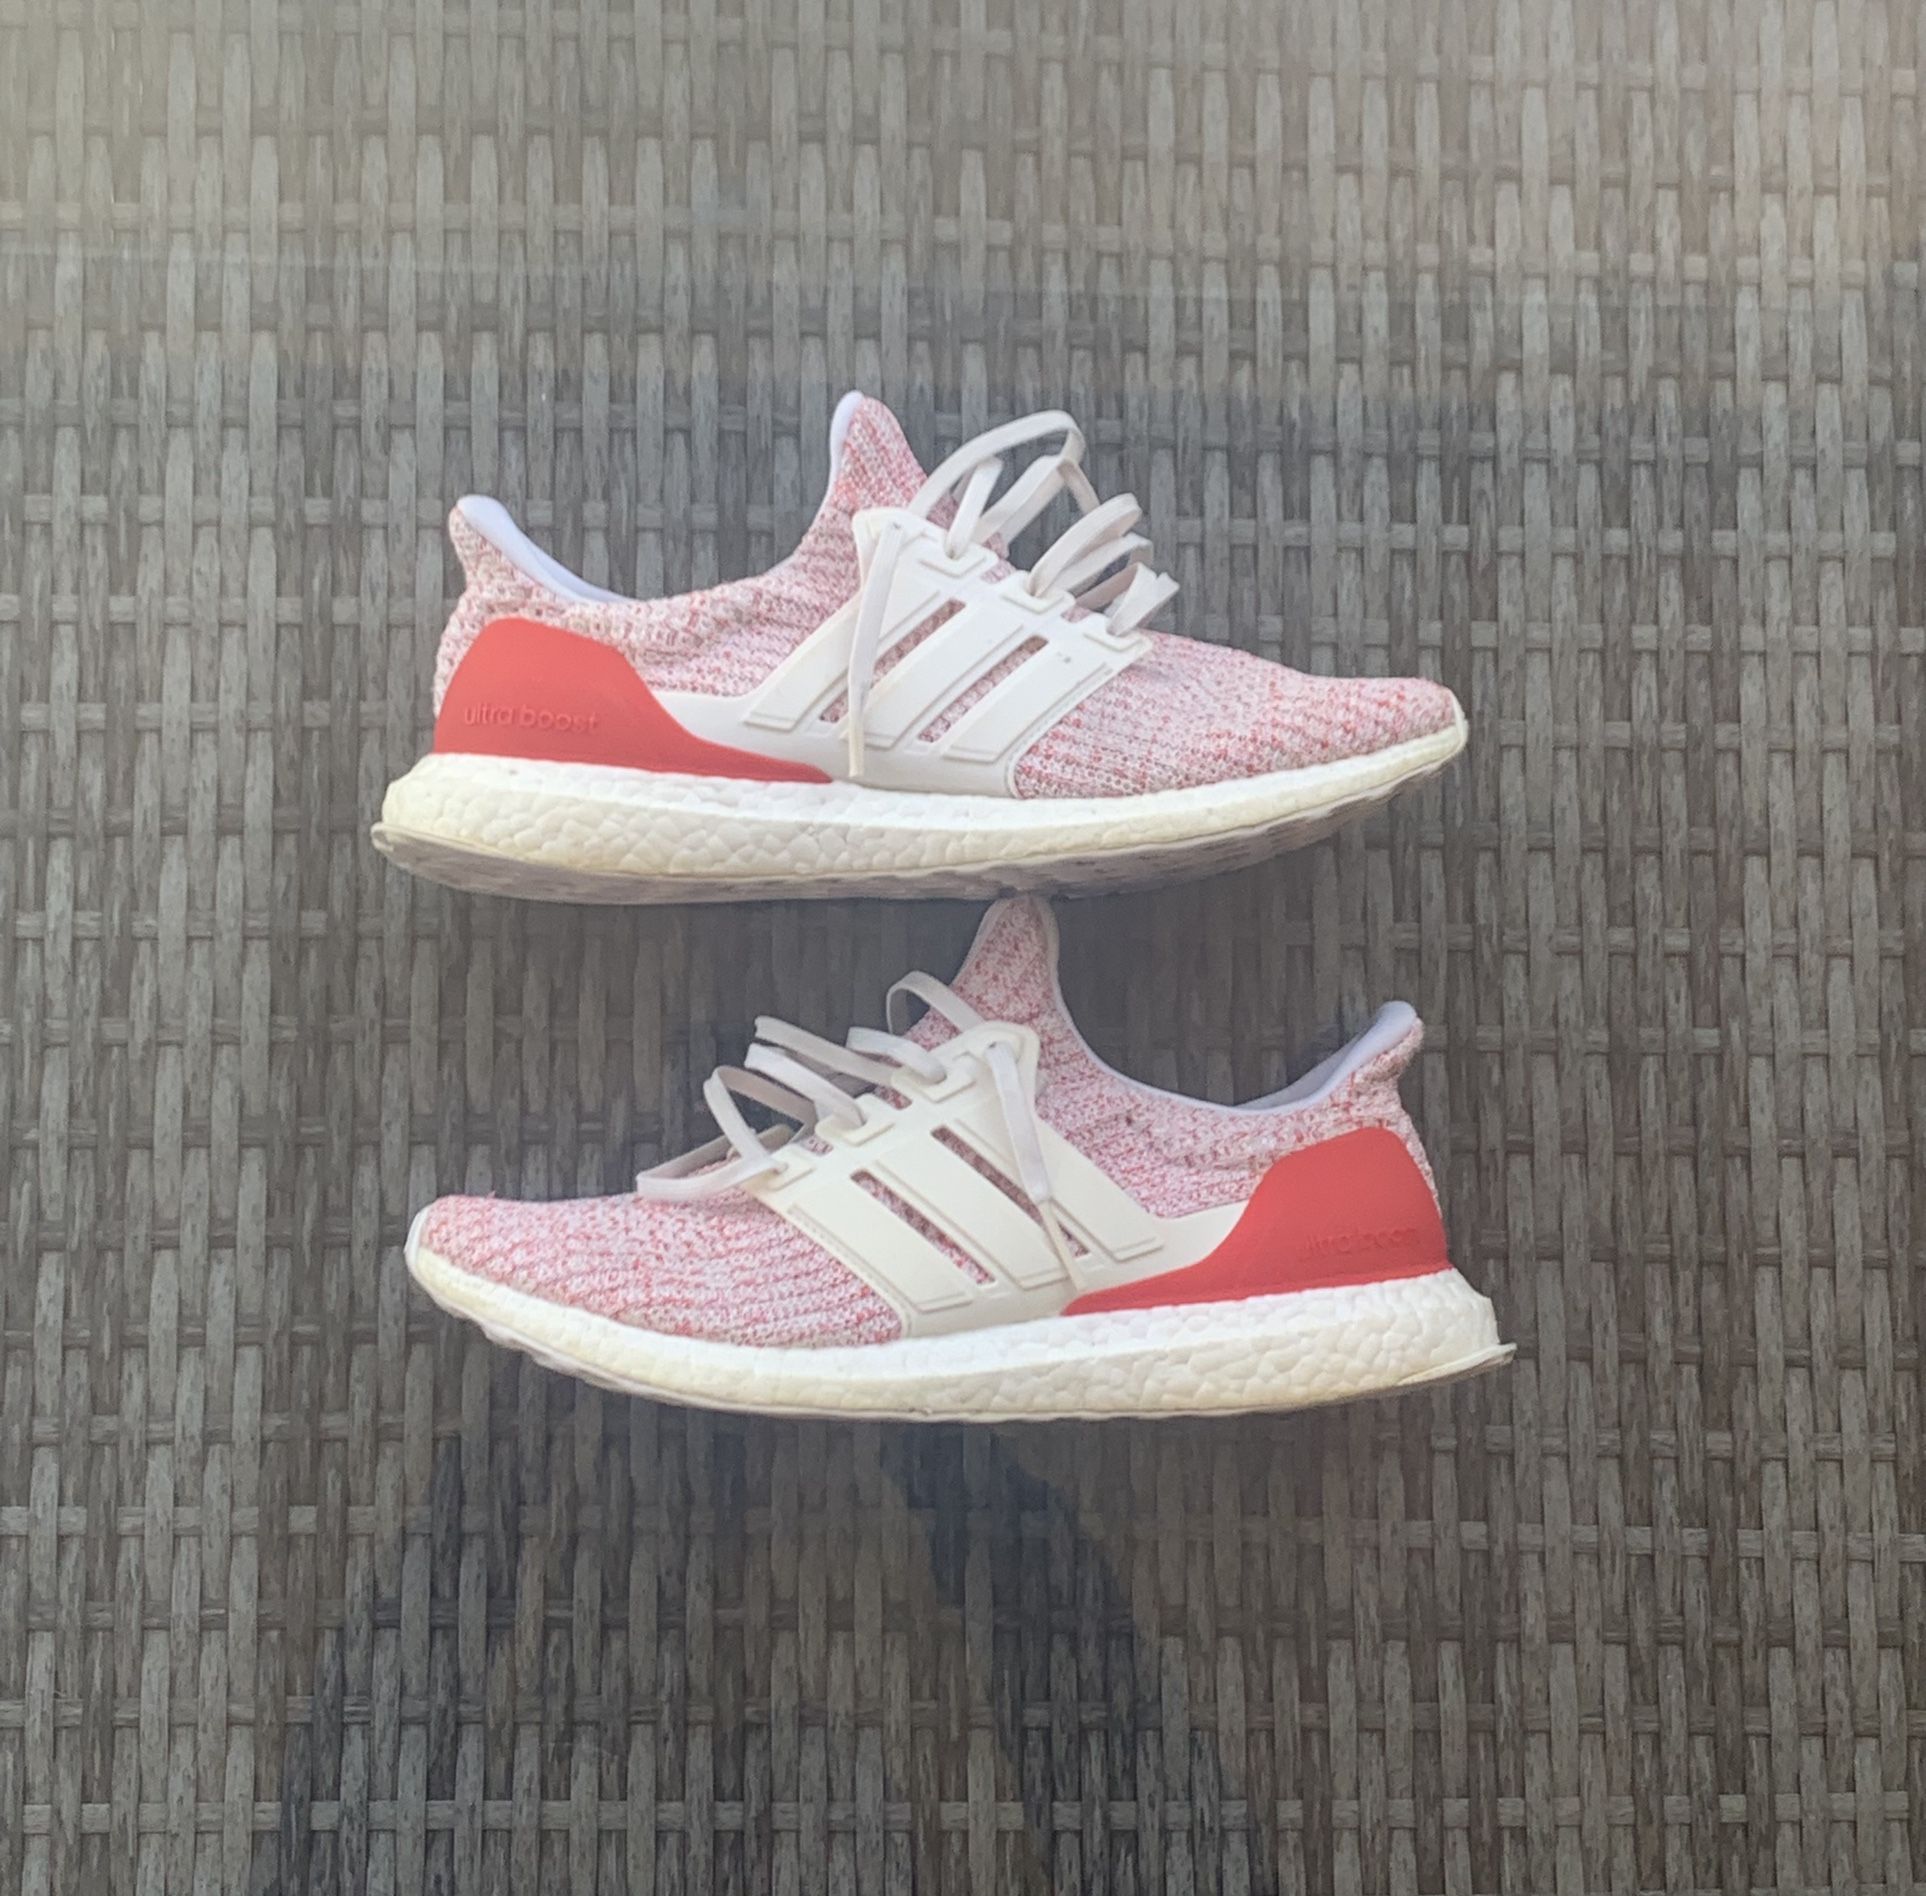 2018 Chalk White Active Red Adidas Ultraboost